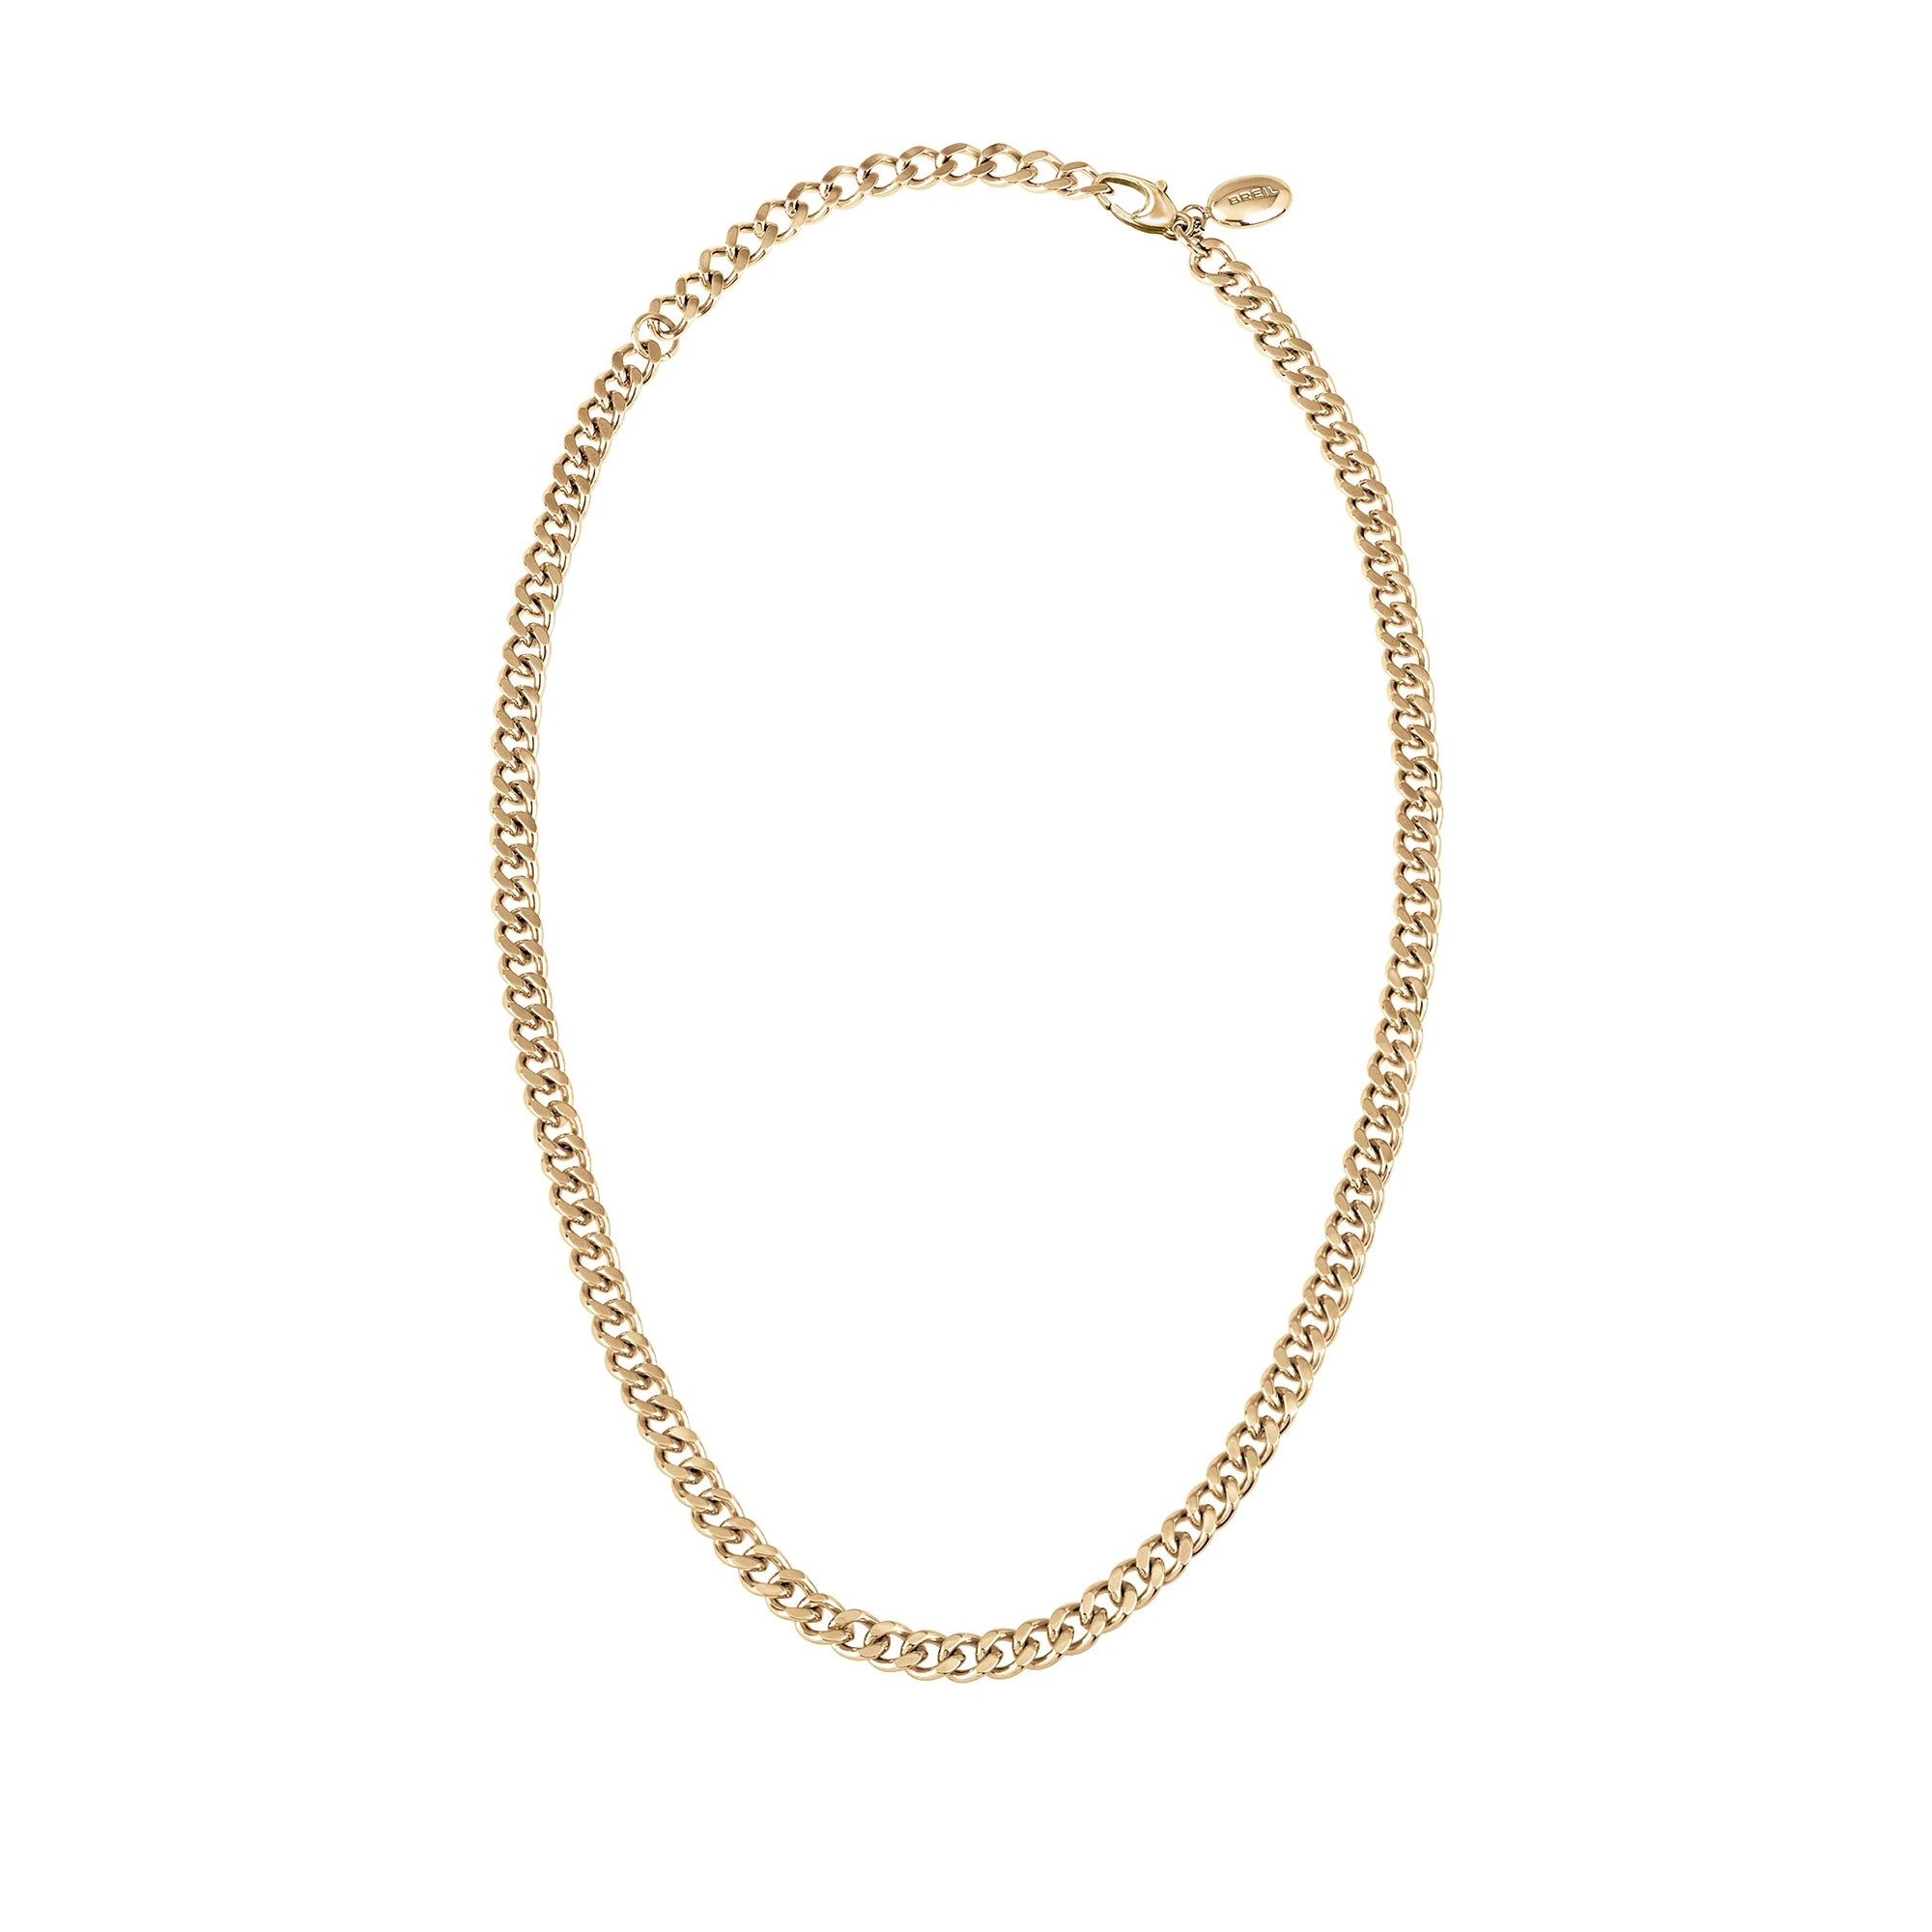 JOIN UP - POLISHED STEEL CHAIN NECKLACE - 1 - TJ2916 | Breil